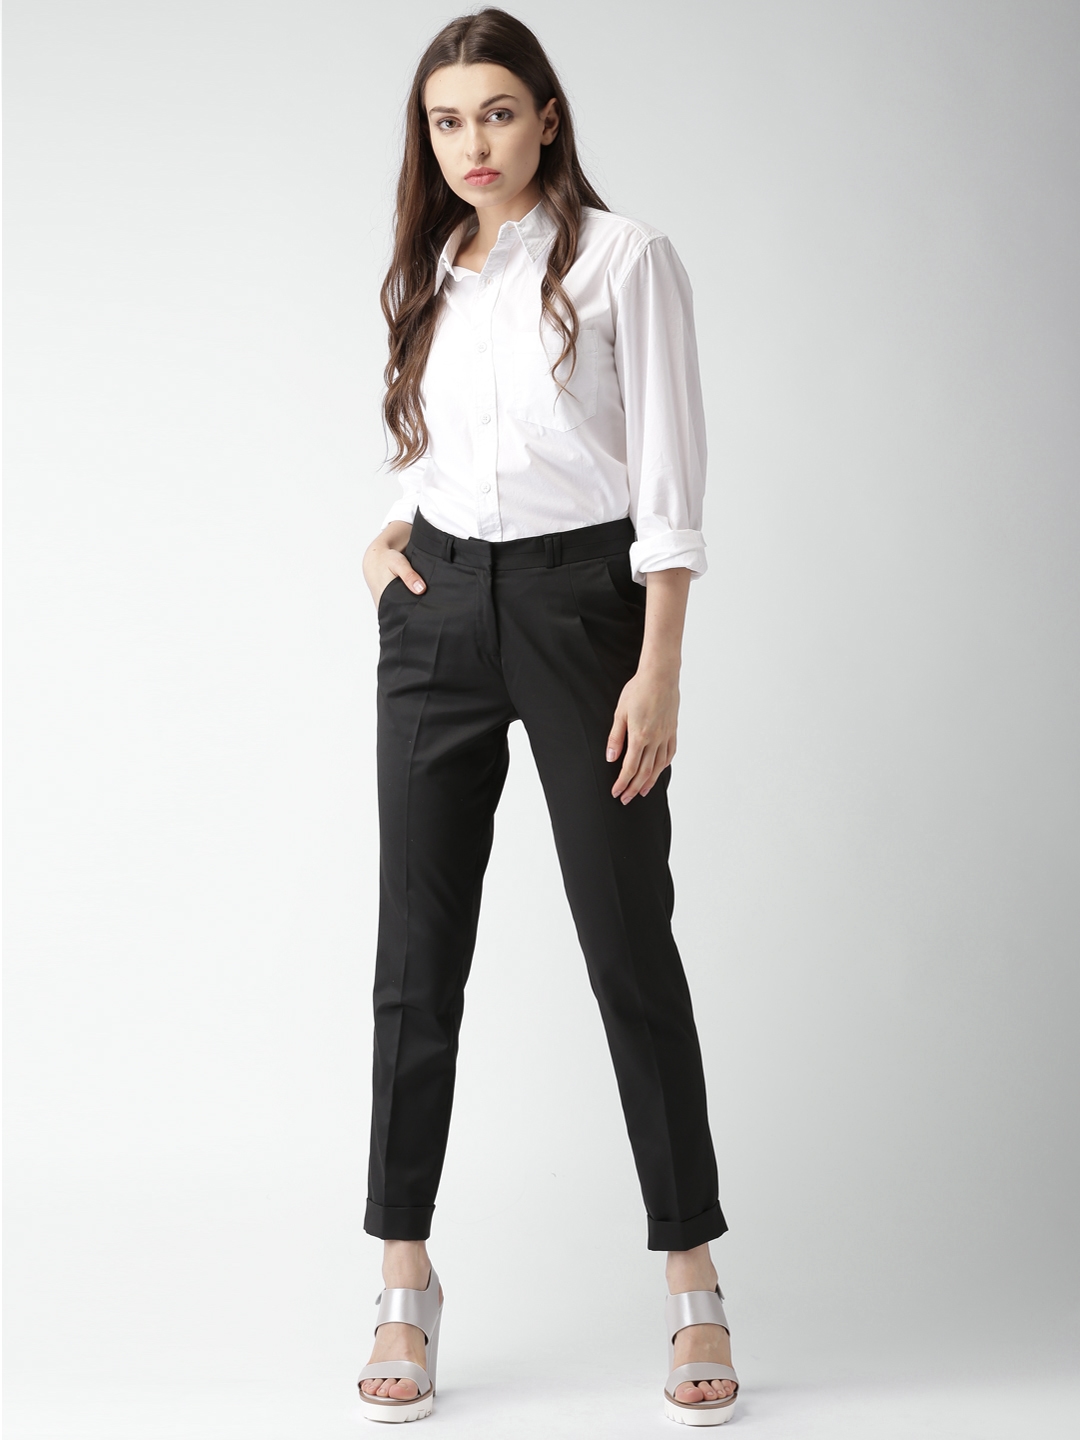 Details more than 157 formal pants for women